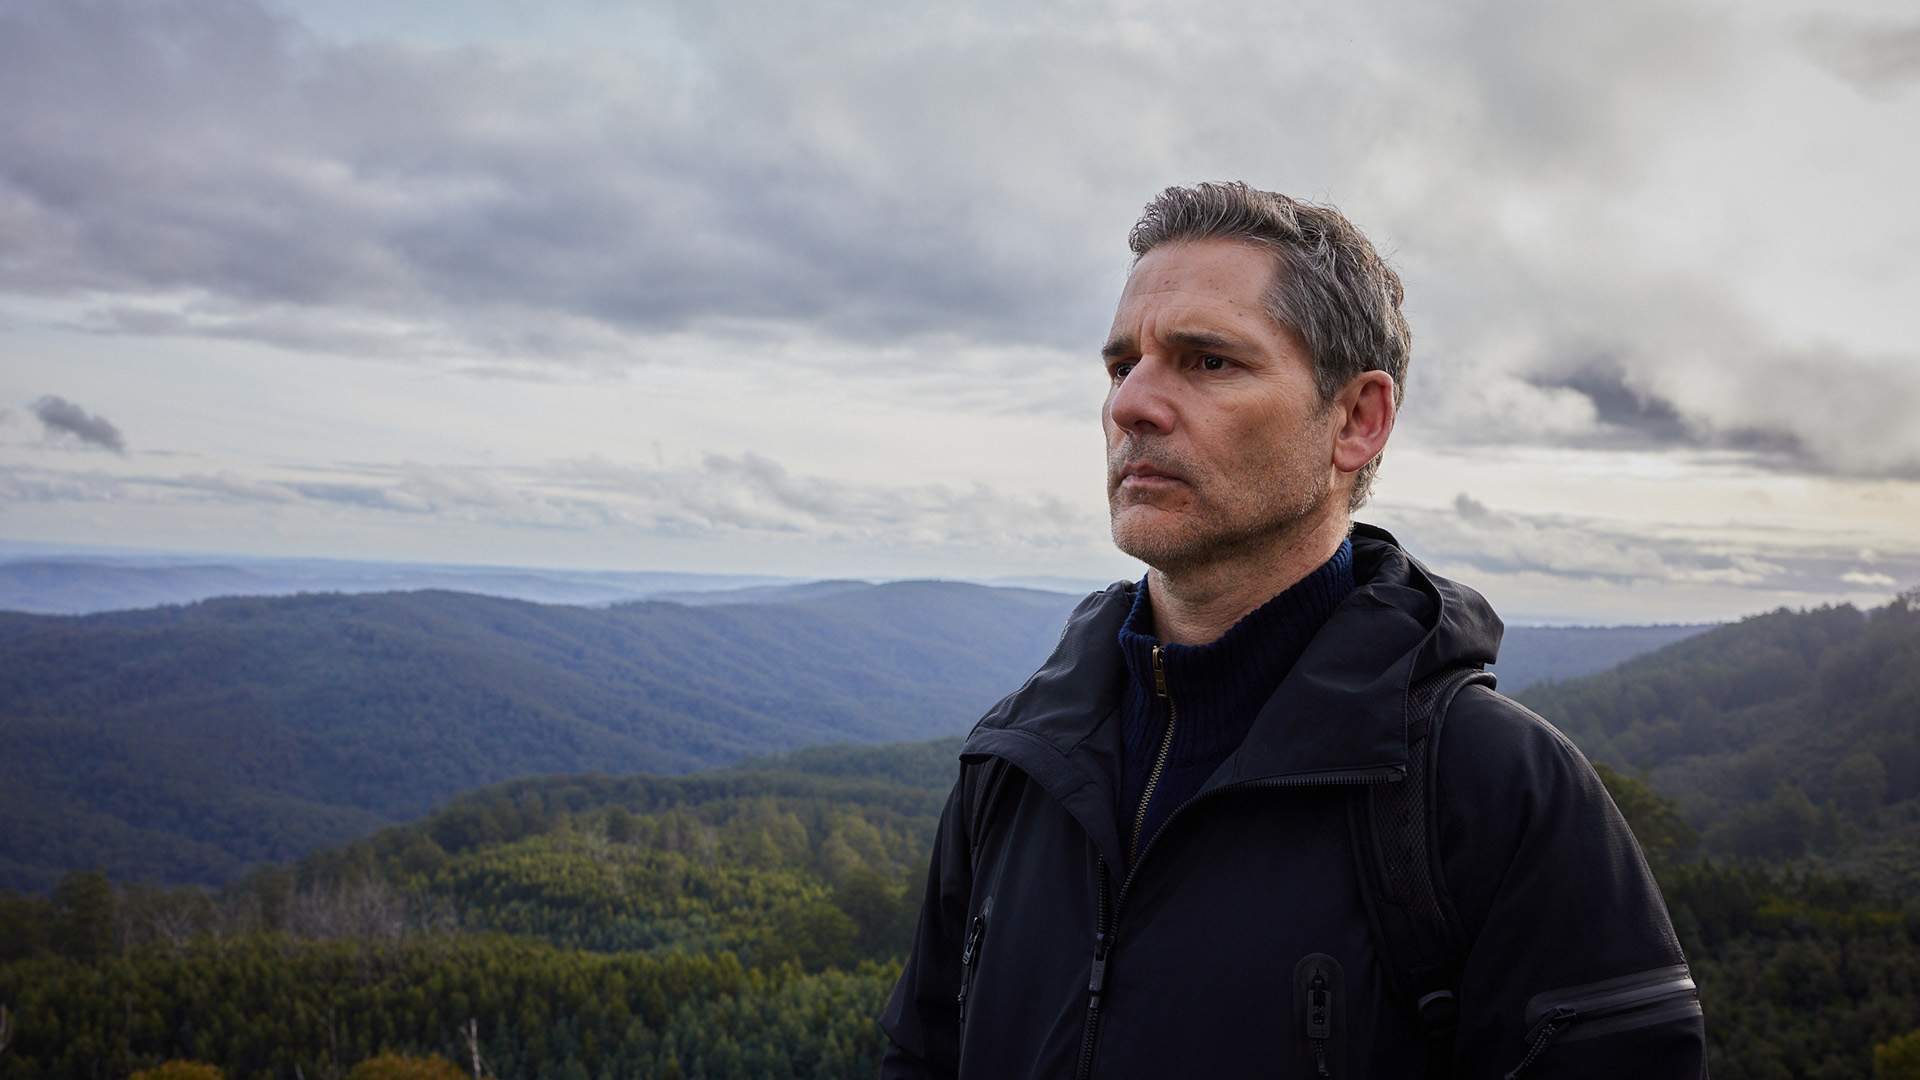 Making Aussie Whodunnits That Peer Beyond the Outback: Eric Bana and Robert Connolly Talk 'The Dry' and 'Force of Nature'